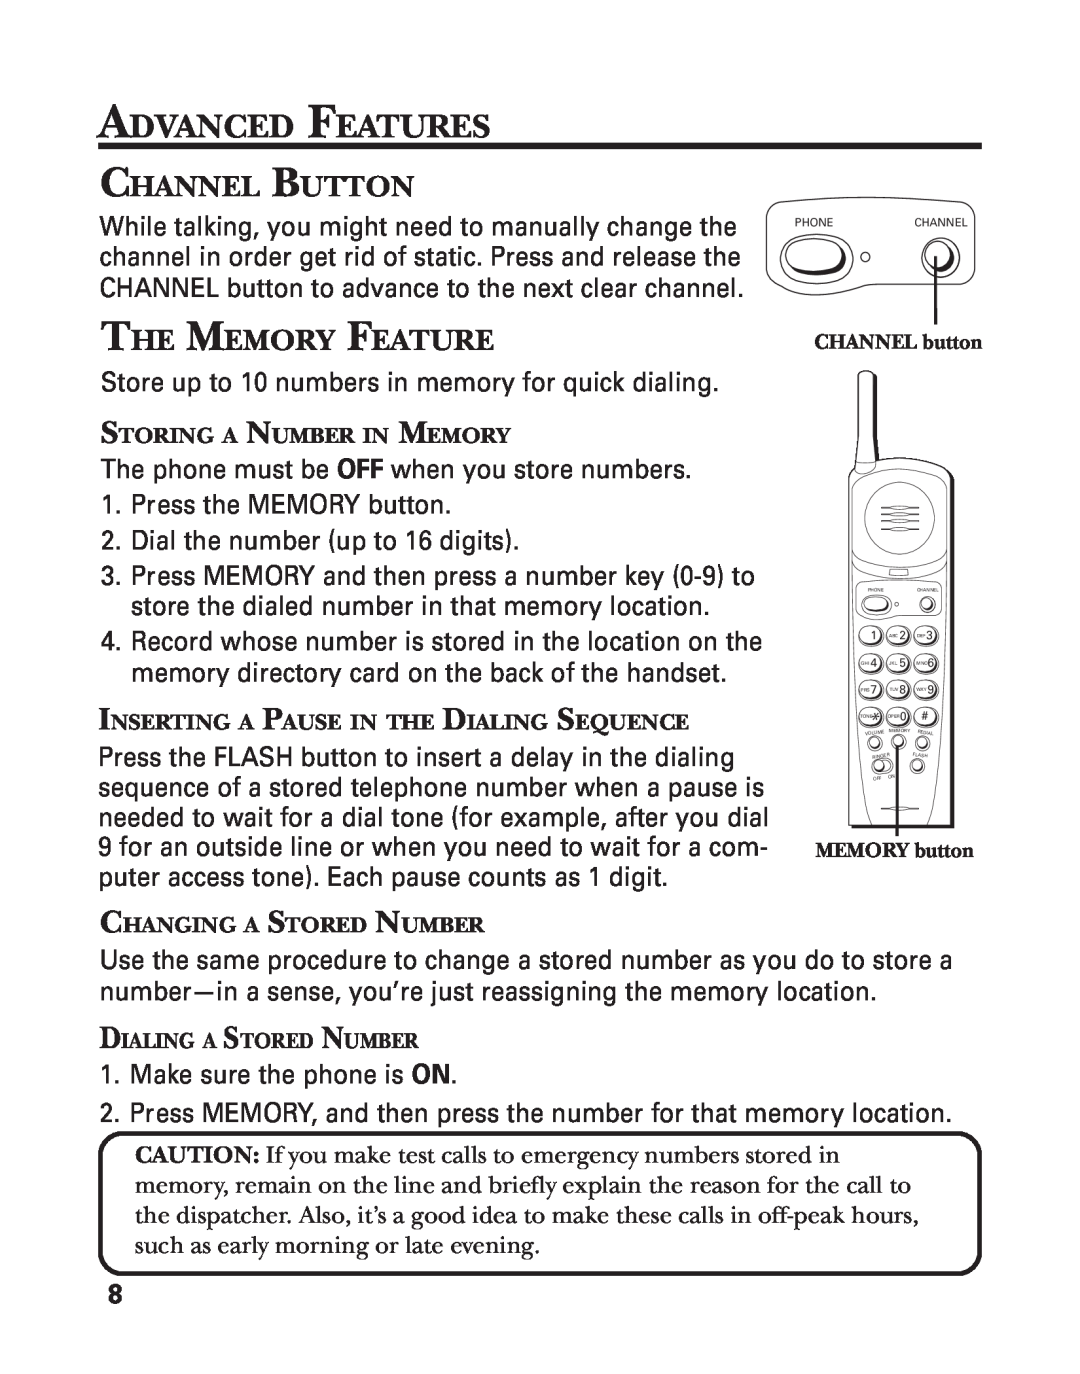 GE 2-9752, 2-9751, 2-9753 manual Advanced Features, Channel Button, The Memory Feature 